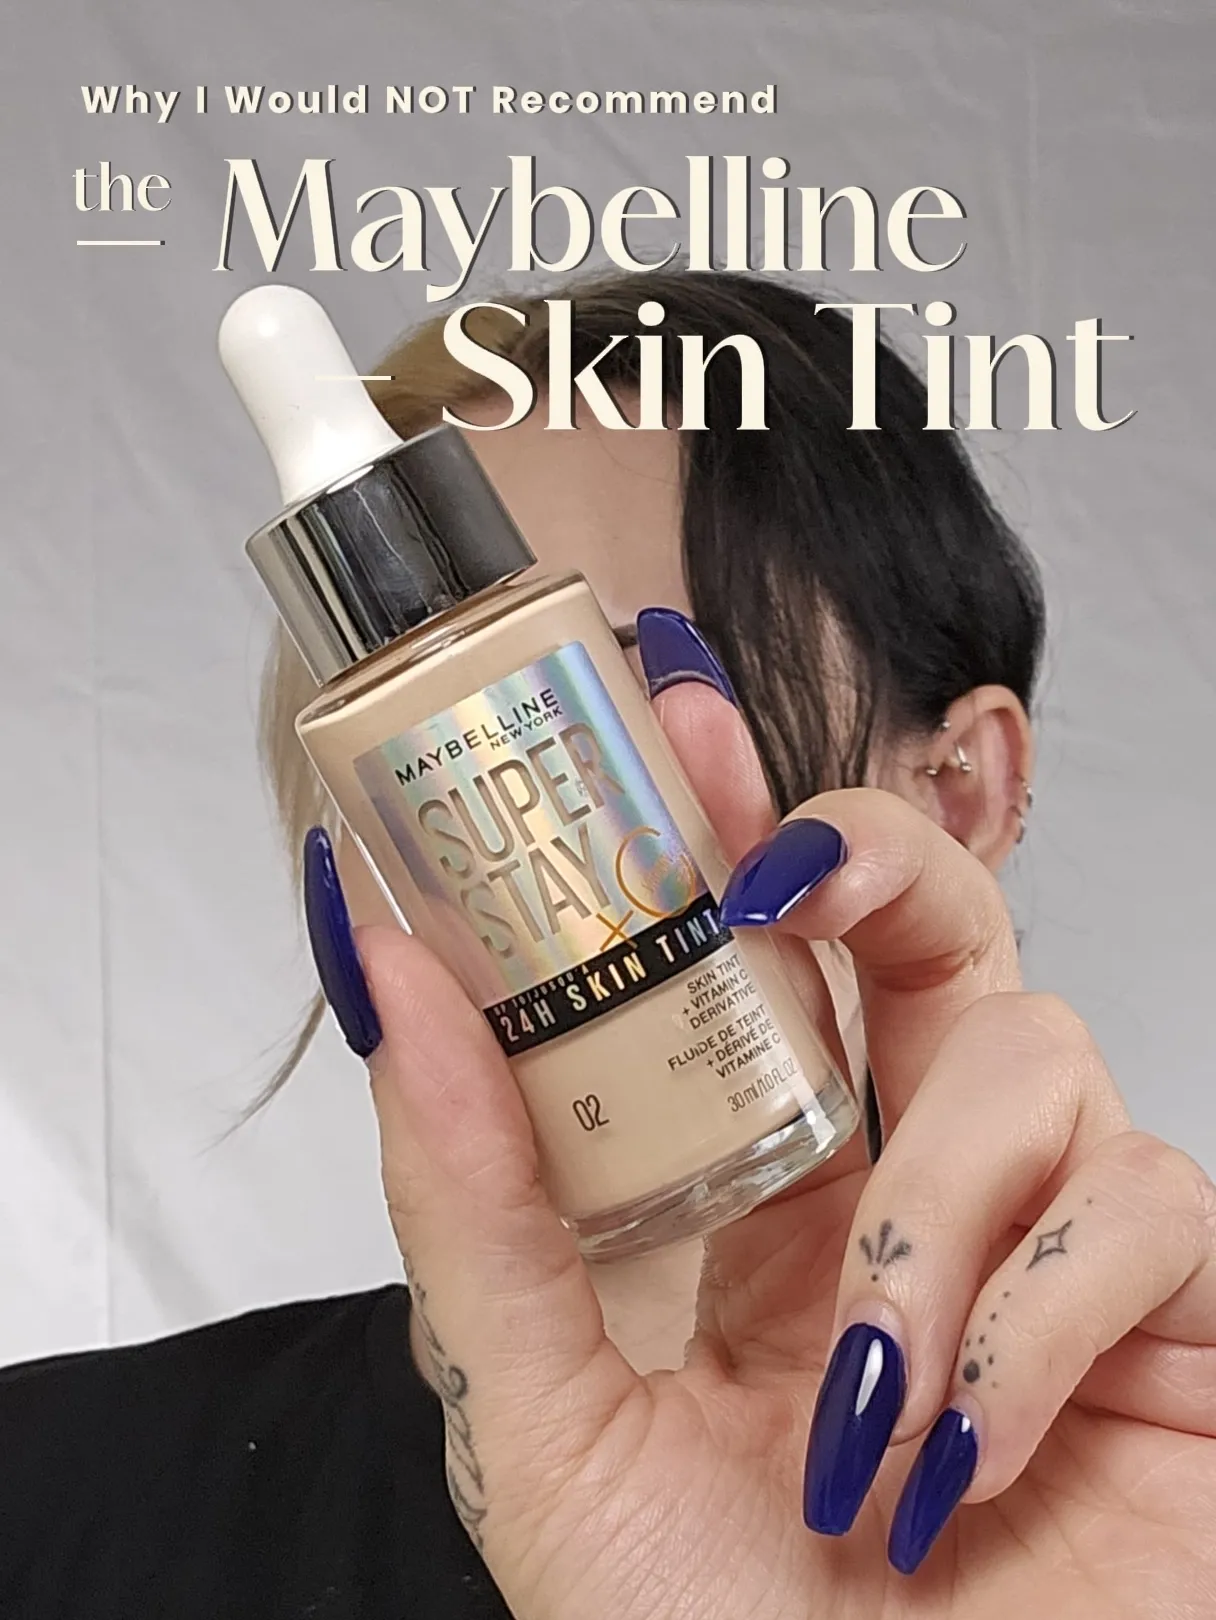 MAYBELLINE SUPER STAY 24H SKIN TINT + VITAMIN C ON Brown ￼SKIN #newmakeup # skintint #maybelline 